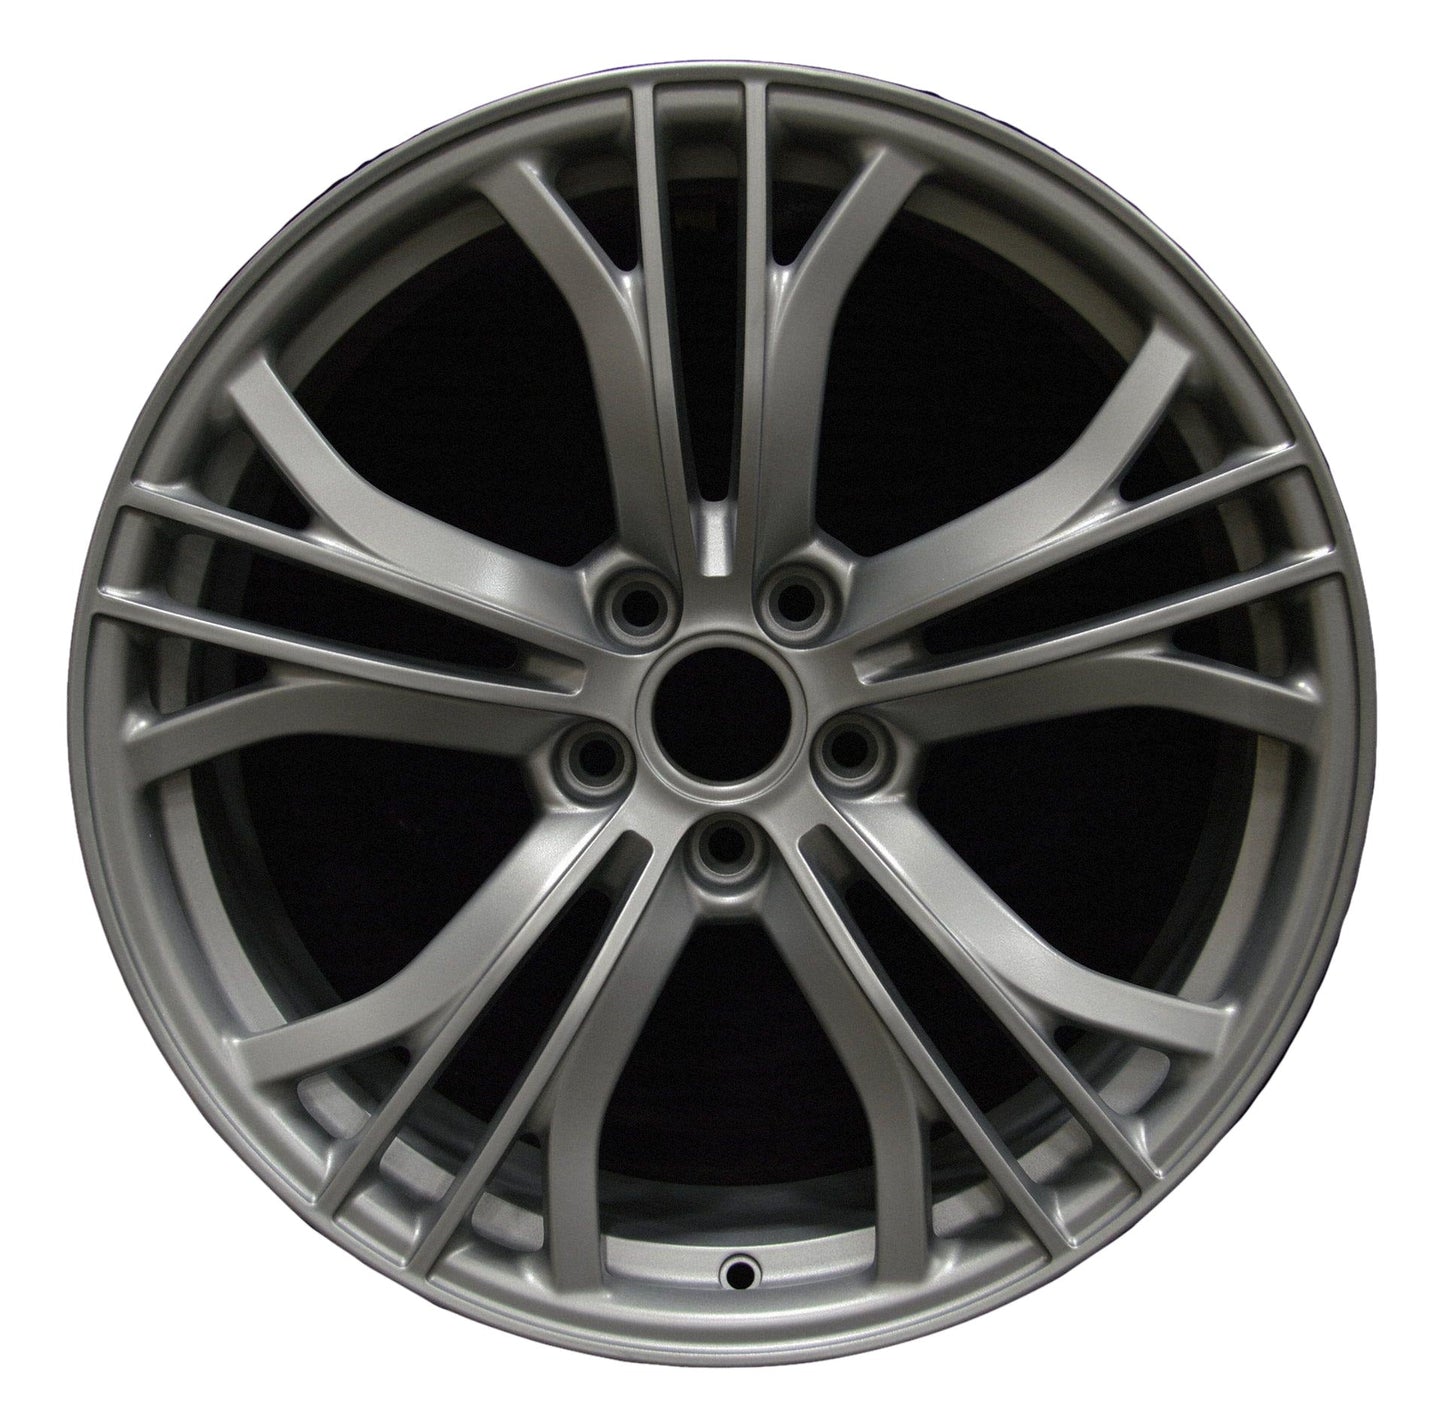 Audi R8  2011, 2012, 2013, 2014, 2015 Factory OEM Car Wheel Size 19x11 Alloy WAO.58907RE.LC02.FFC2